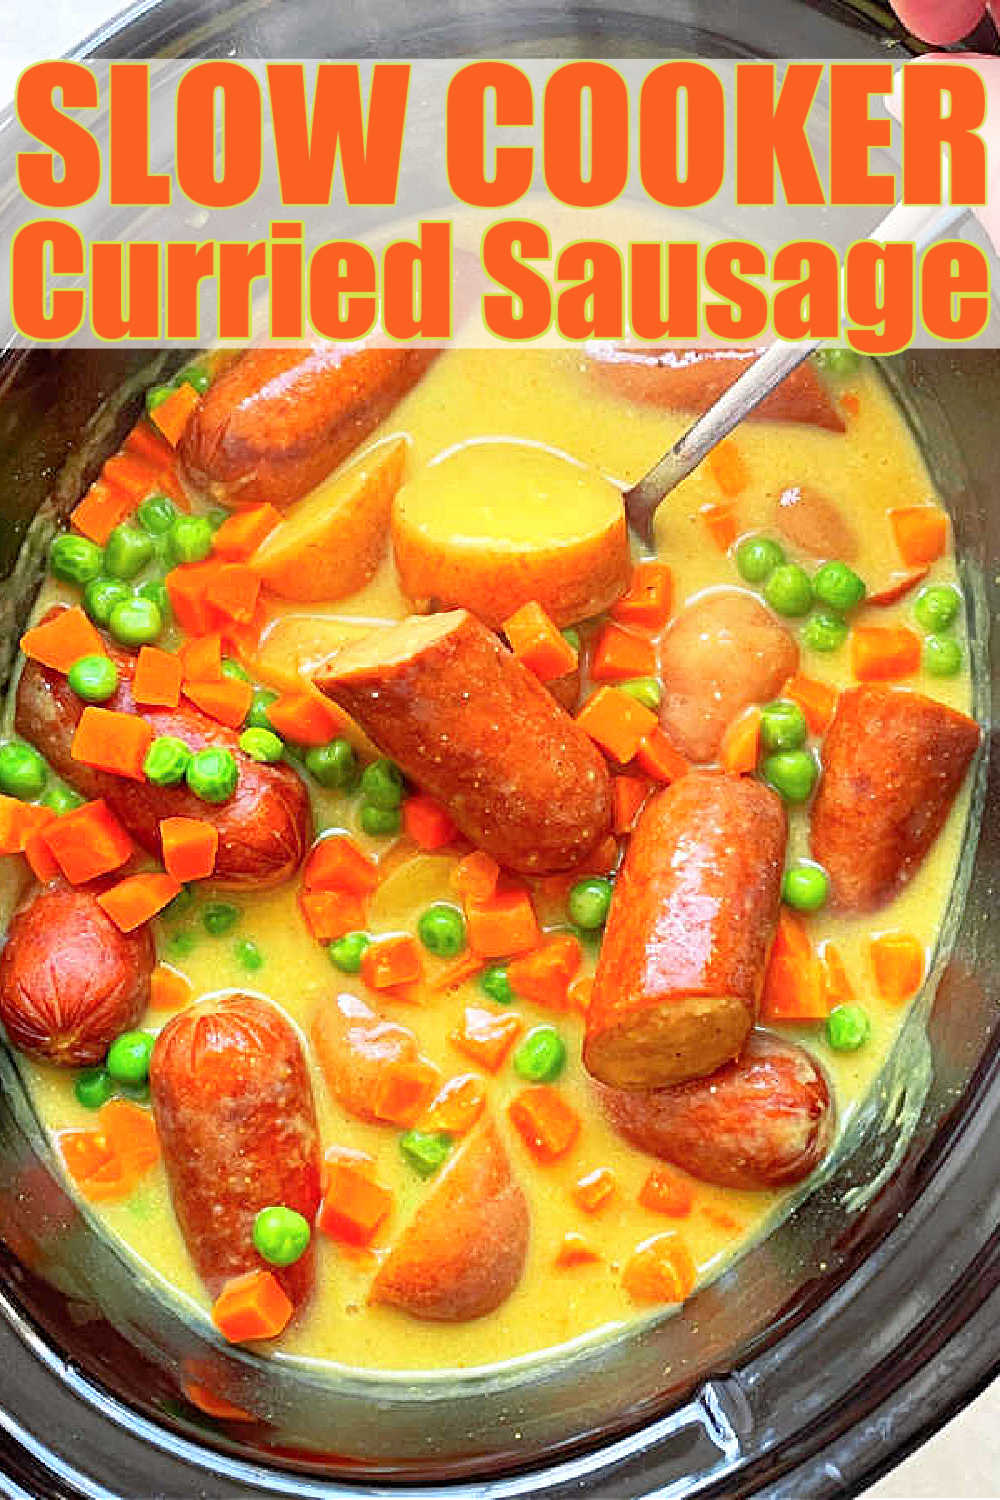 Slow Cooker Curried Sausage | Foodtastic Mom #slowcookerrecipes #crockpotrecipes #curriedsausage #slowcookercurriedsausage via @foodtasticmom